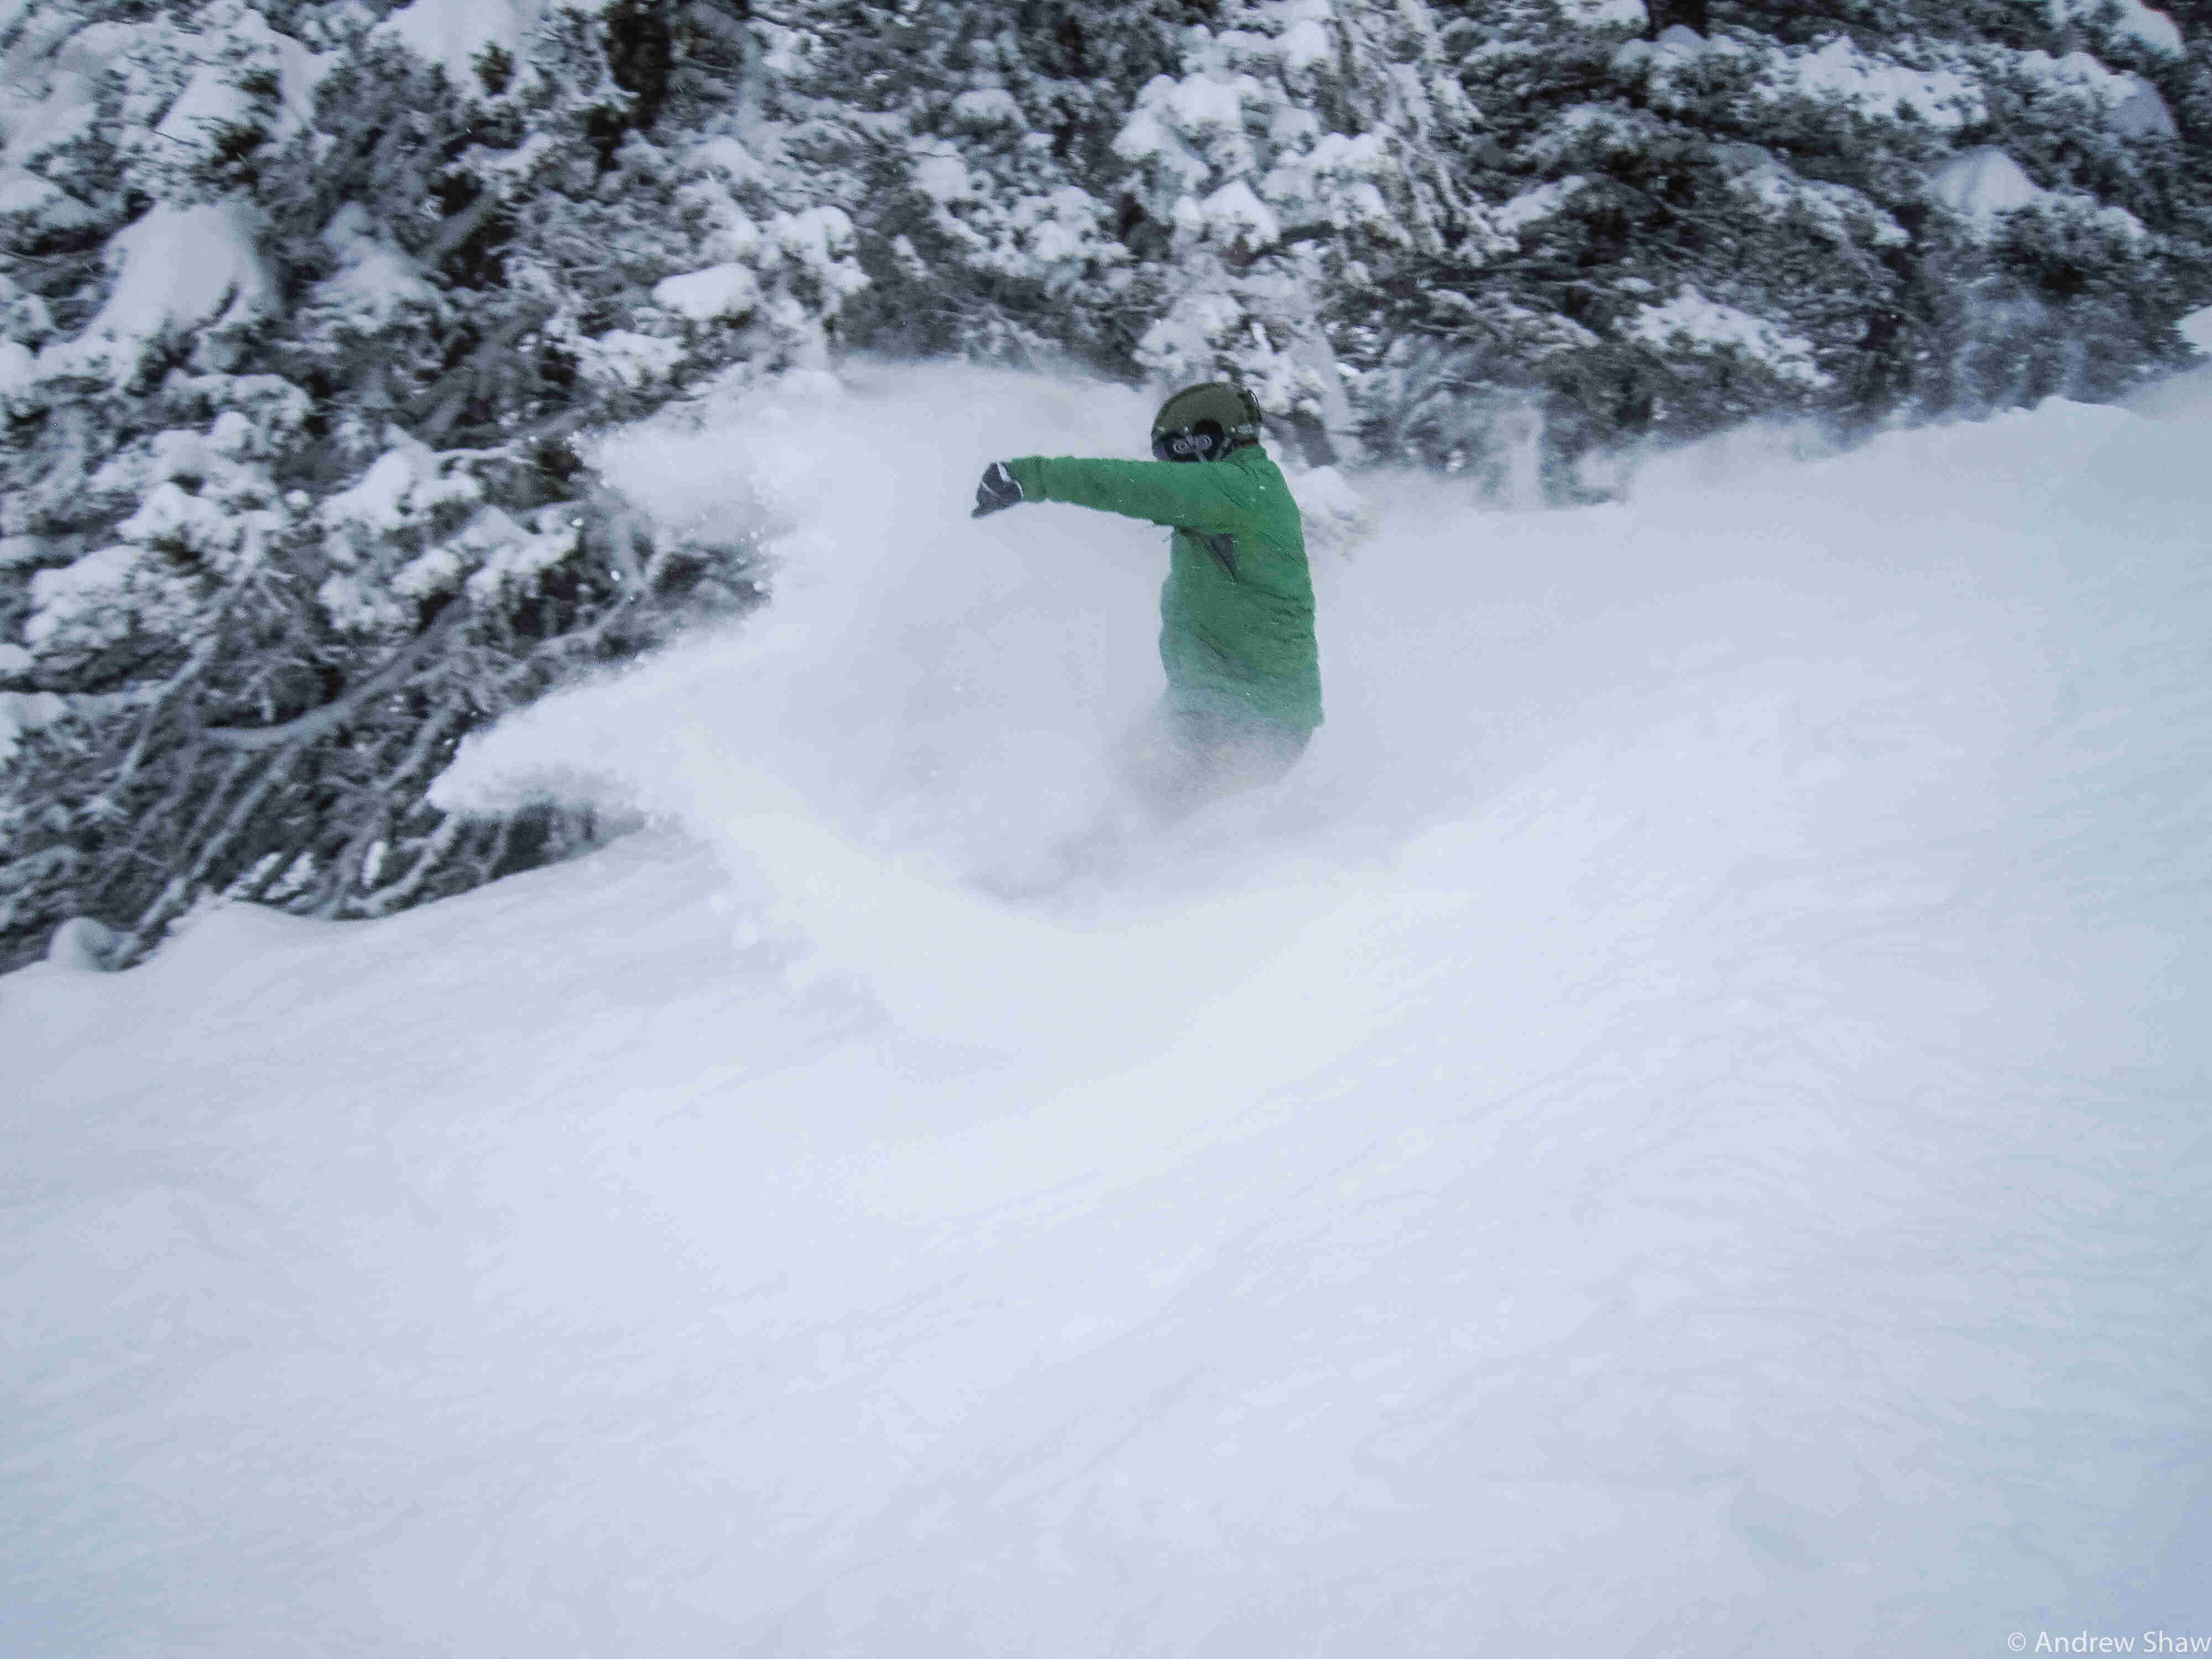 Side view of a skier, wearing a green jacket, kicking up snow while they sky down a hill